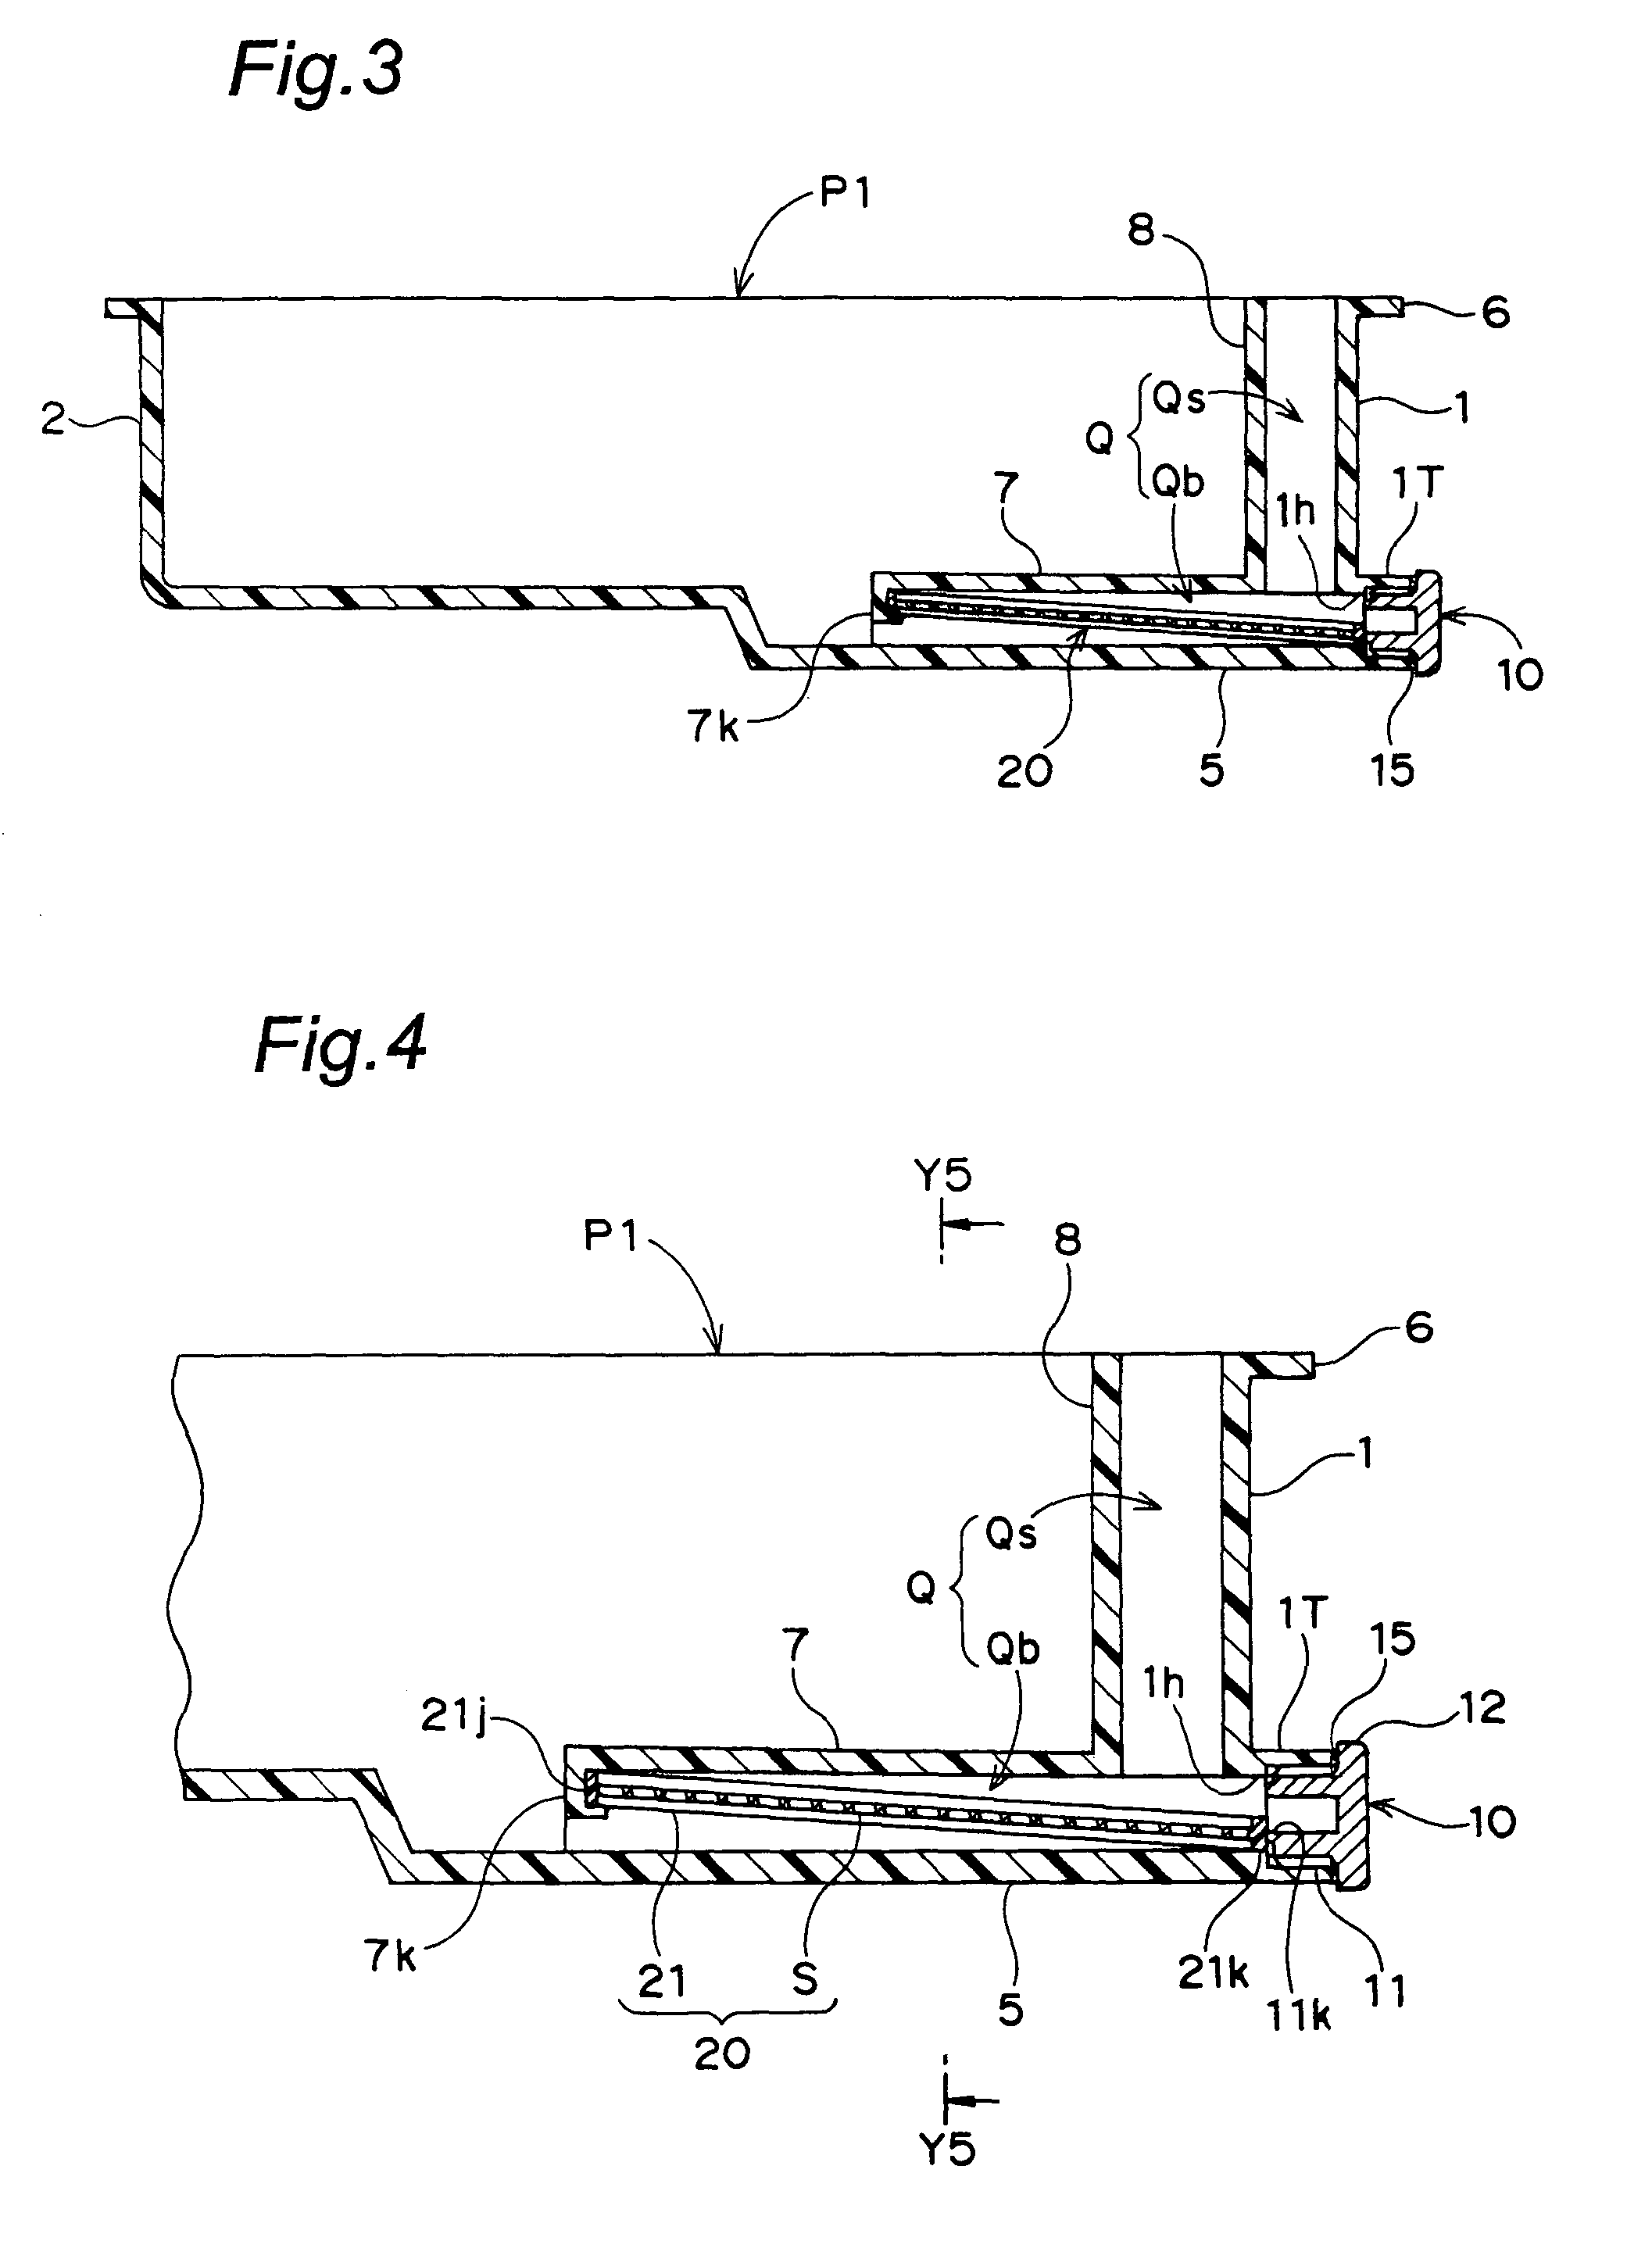 Oil pan with built-in filtering element